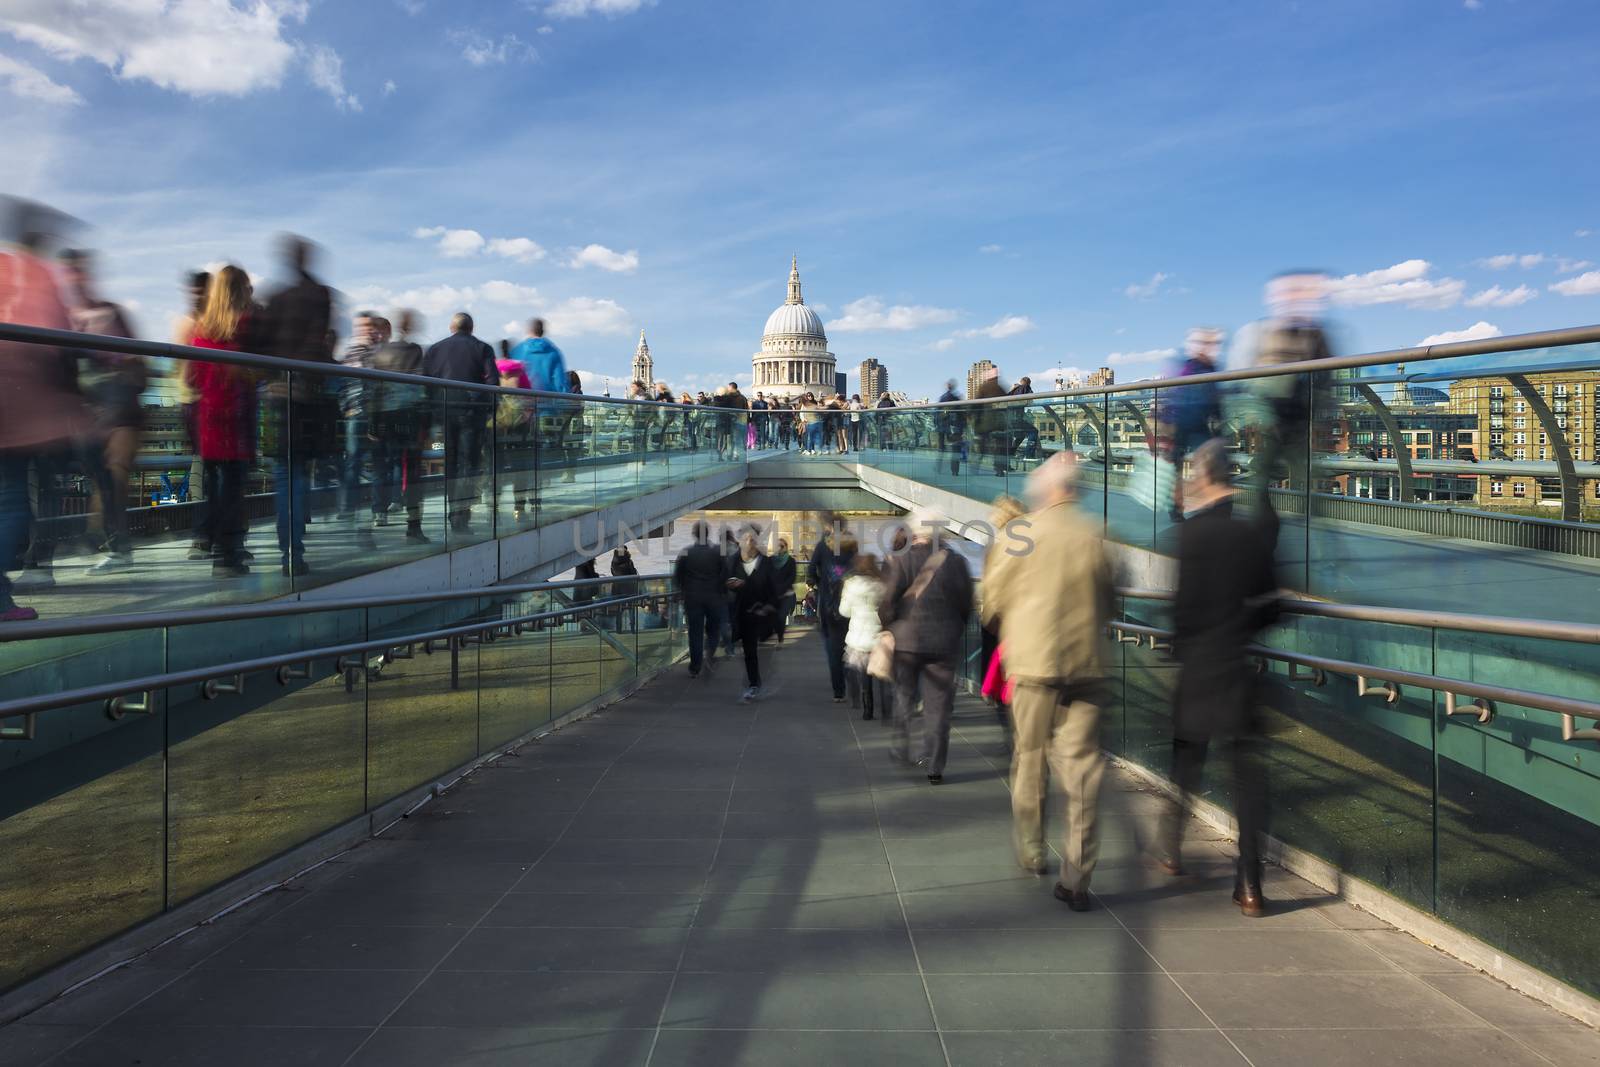 Blurred motion view over the Millennium footbridge looking towards St. Paul's Cathedral